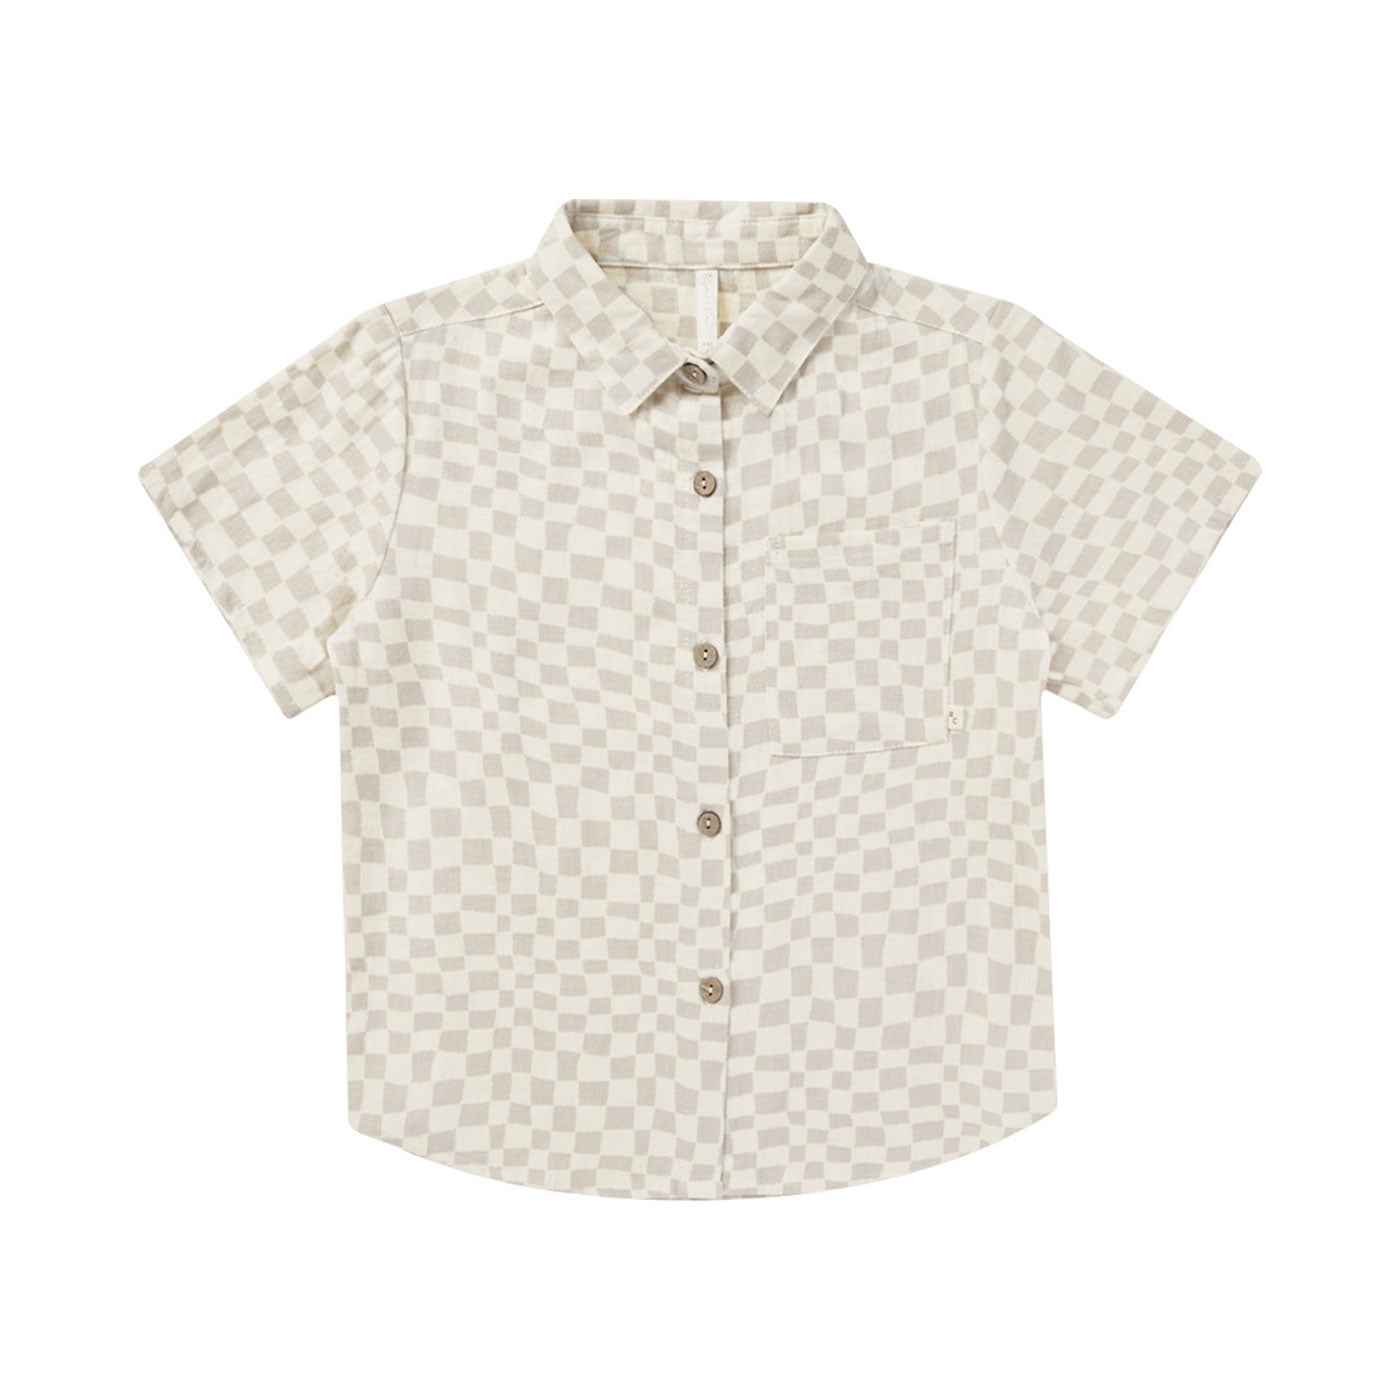 Rylee and Cru Collared Short Sleeve Shirt - Dove Check